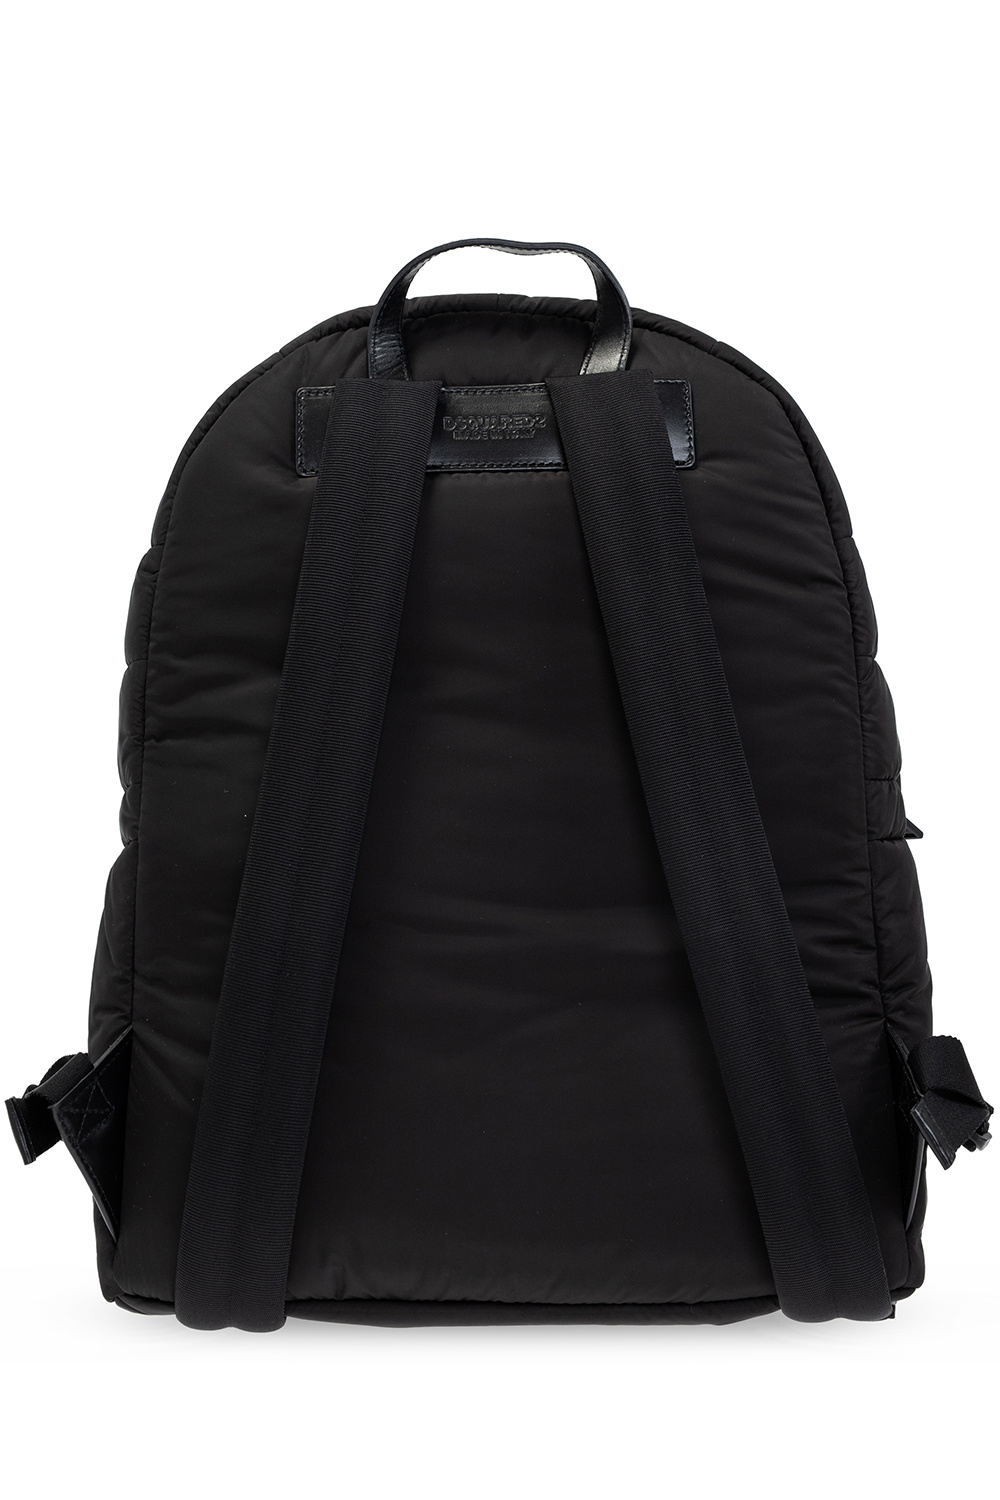 Dsquared2 opus backpack with logo